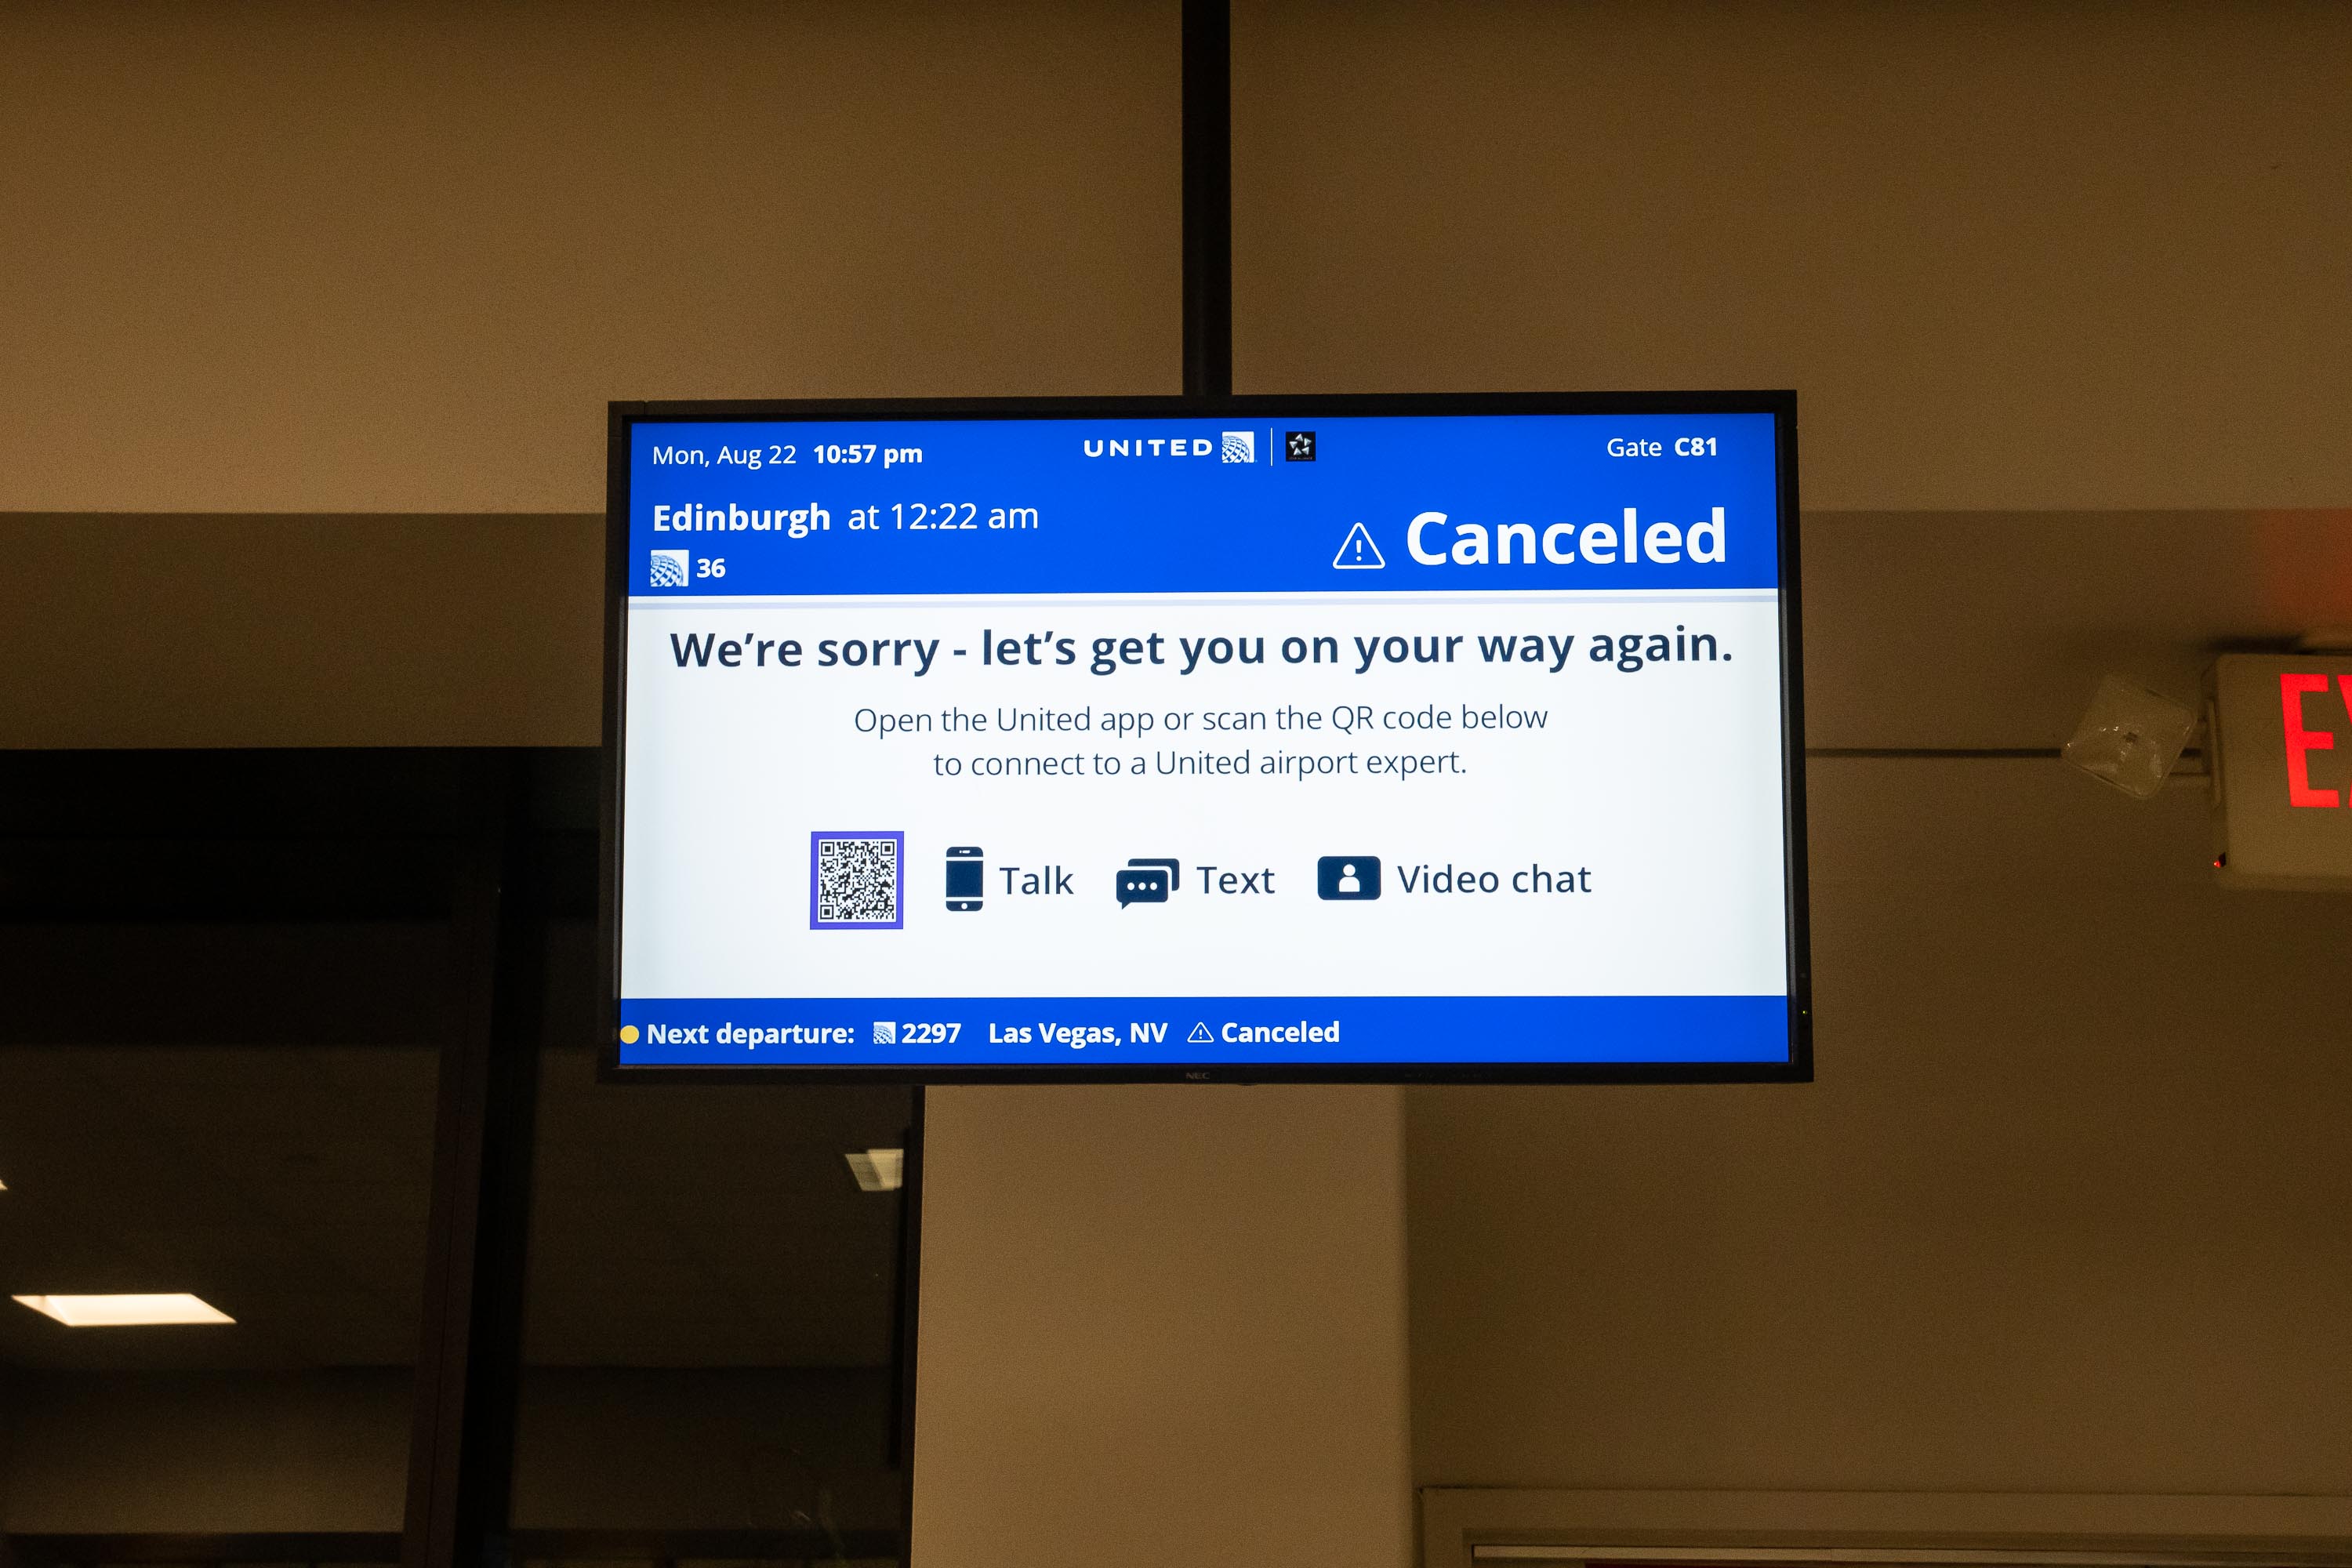 Notification of the cancelled flight at 12:22 AM